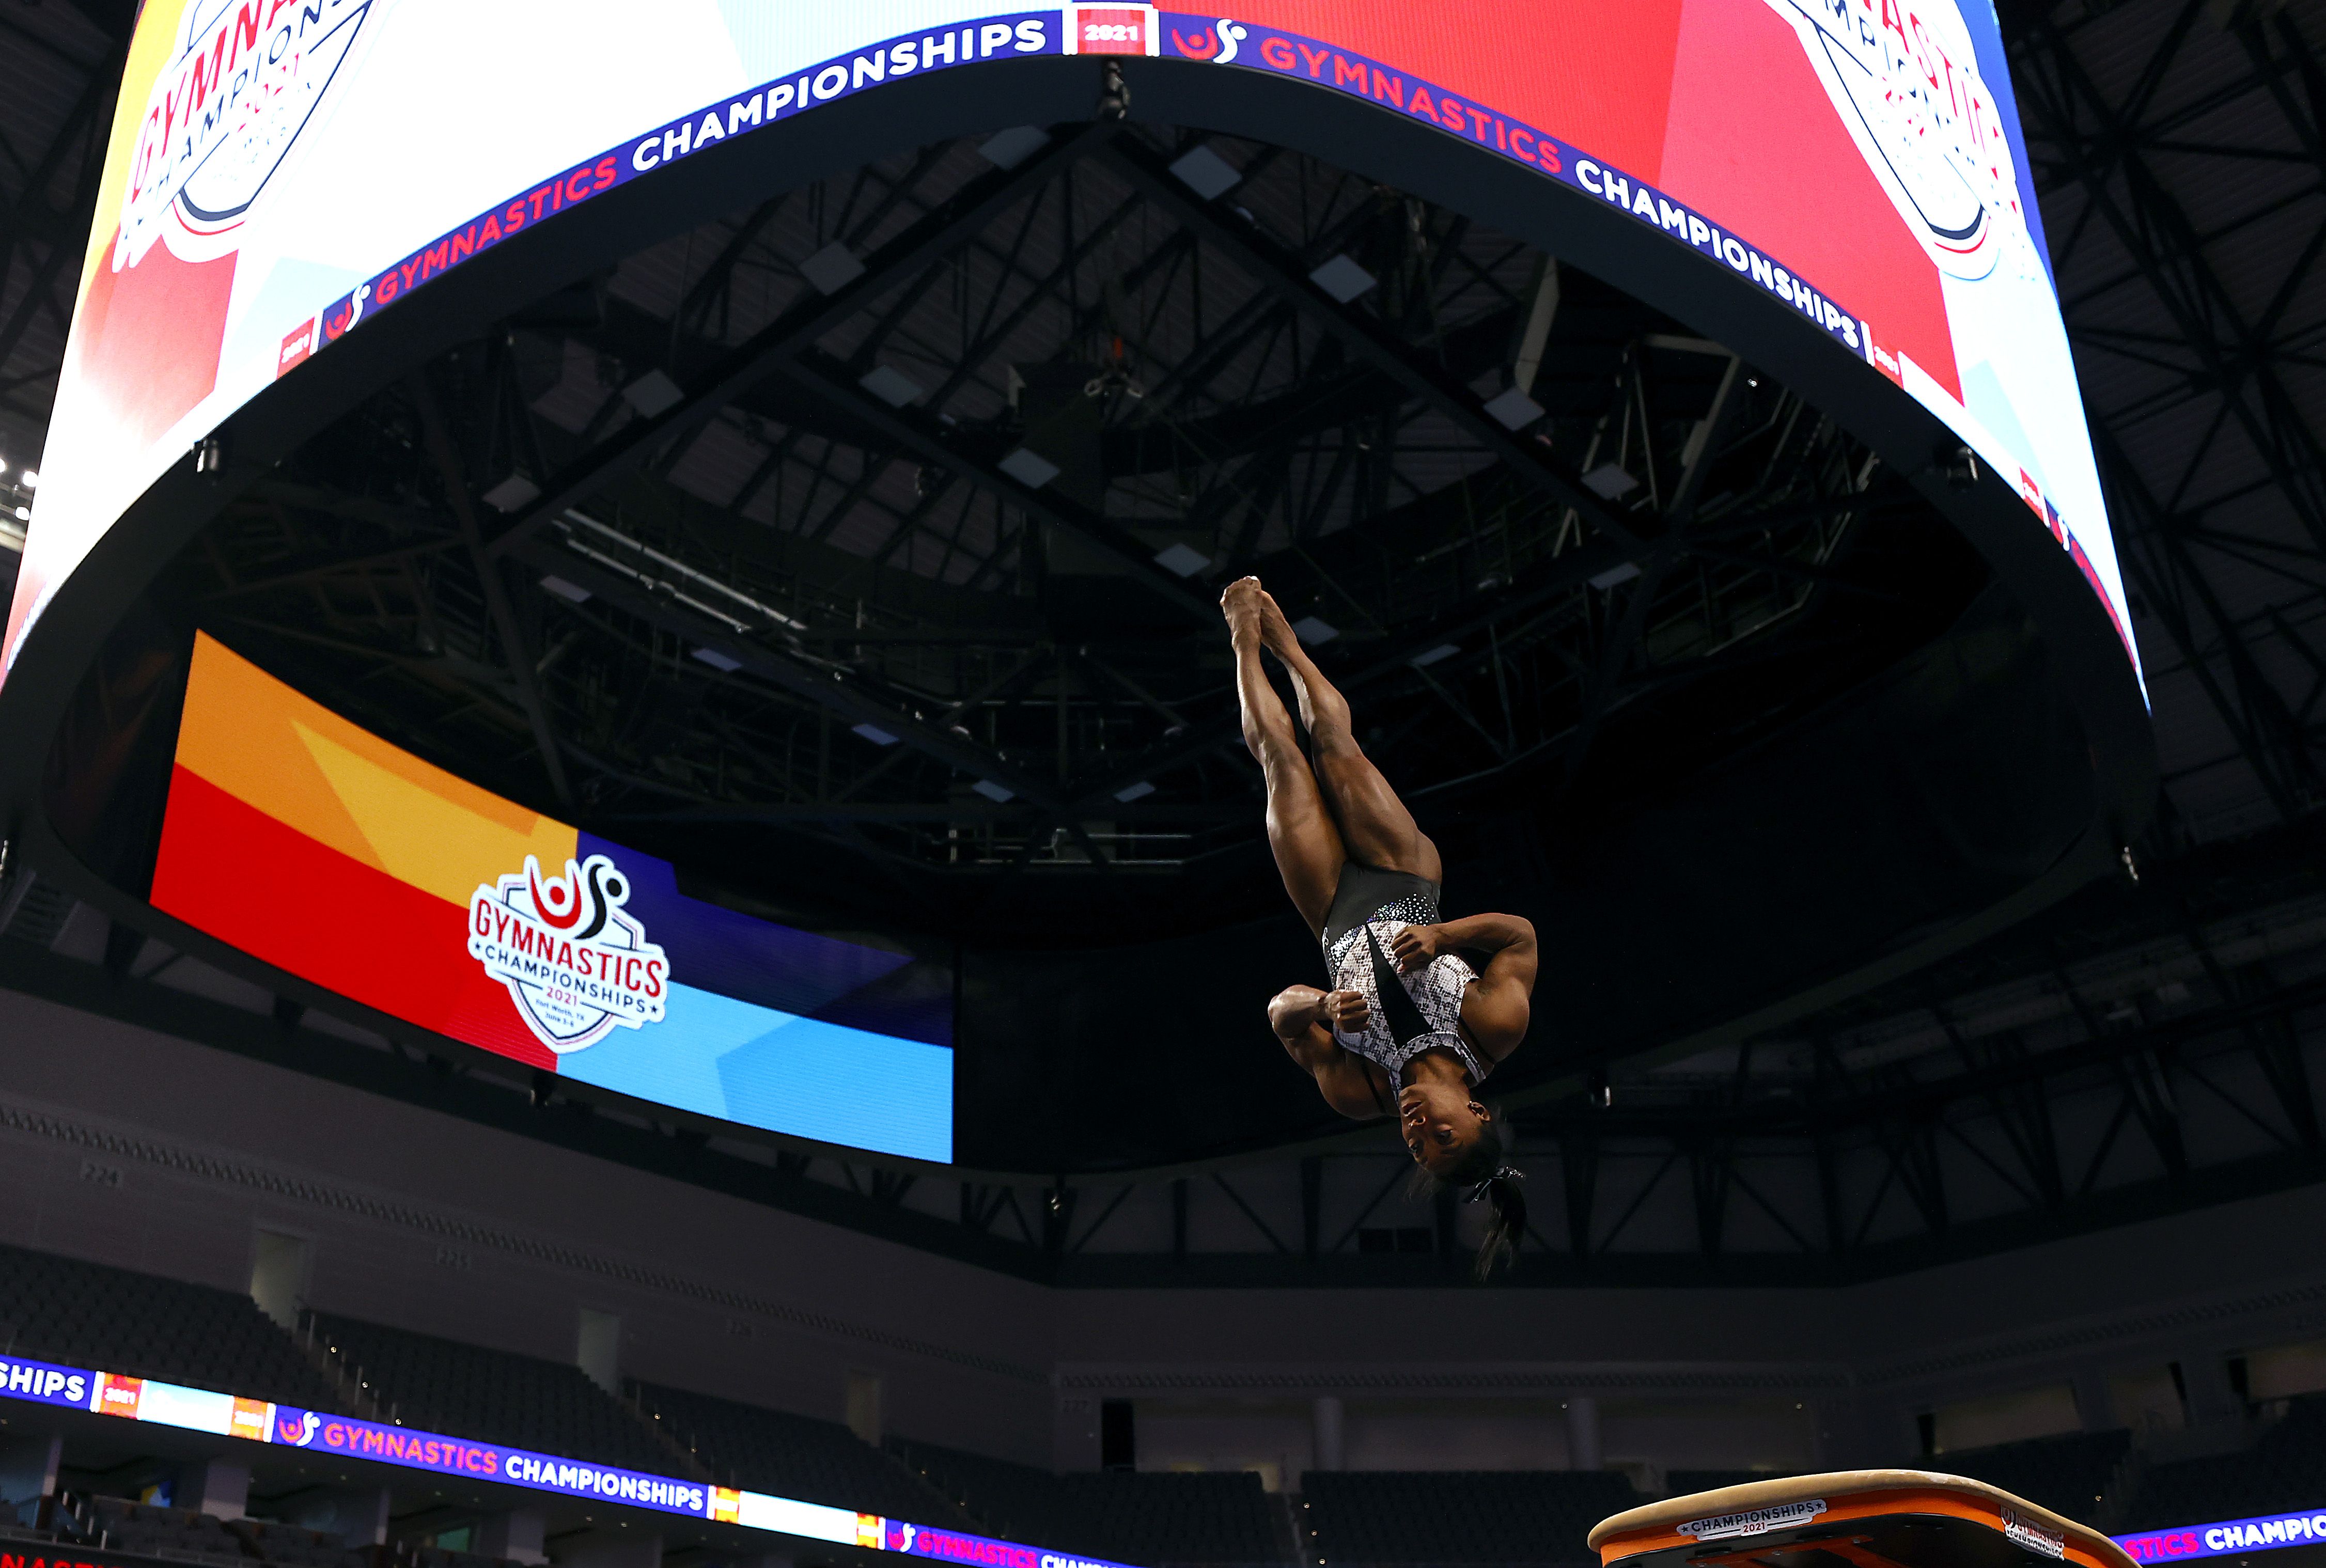  Simone Biles warms up on the vault prior to the Senior Women's competition of the U.S. Gymnastics Championships at Dickies Arena on June 06, 2021 in Fort Worth, Texas.